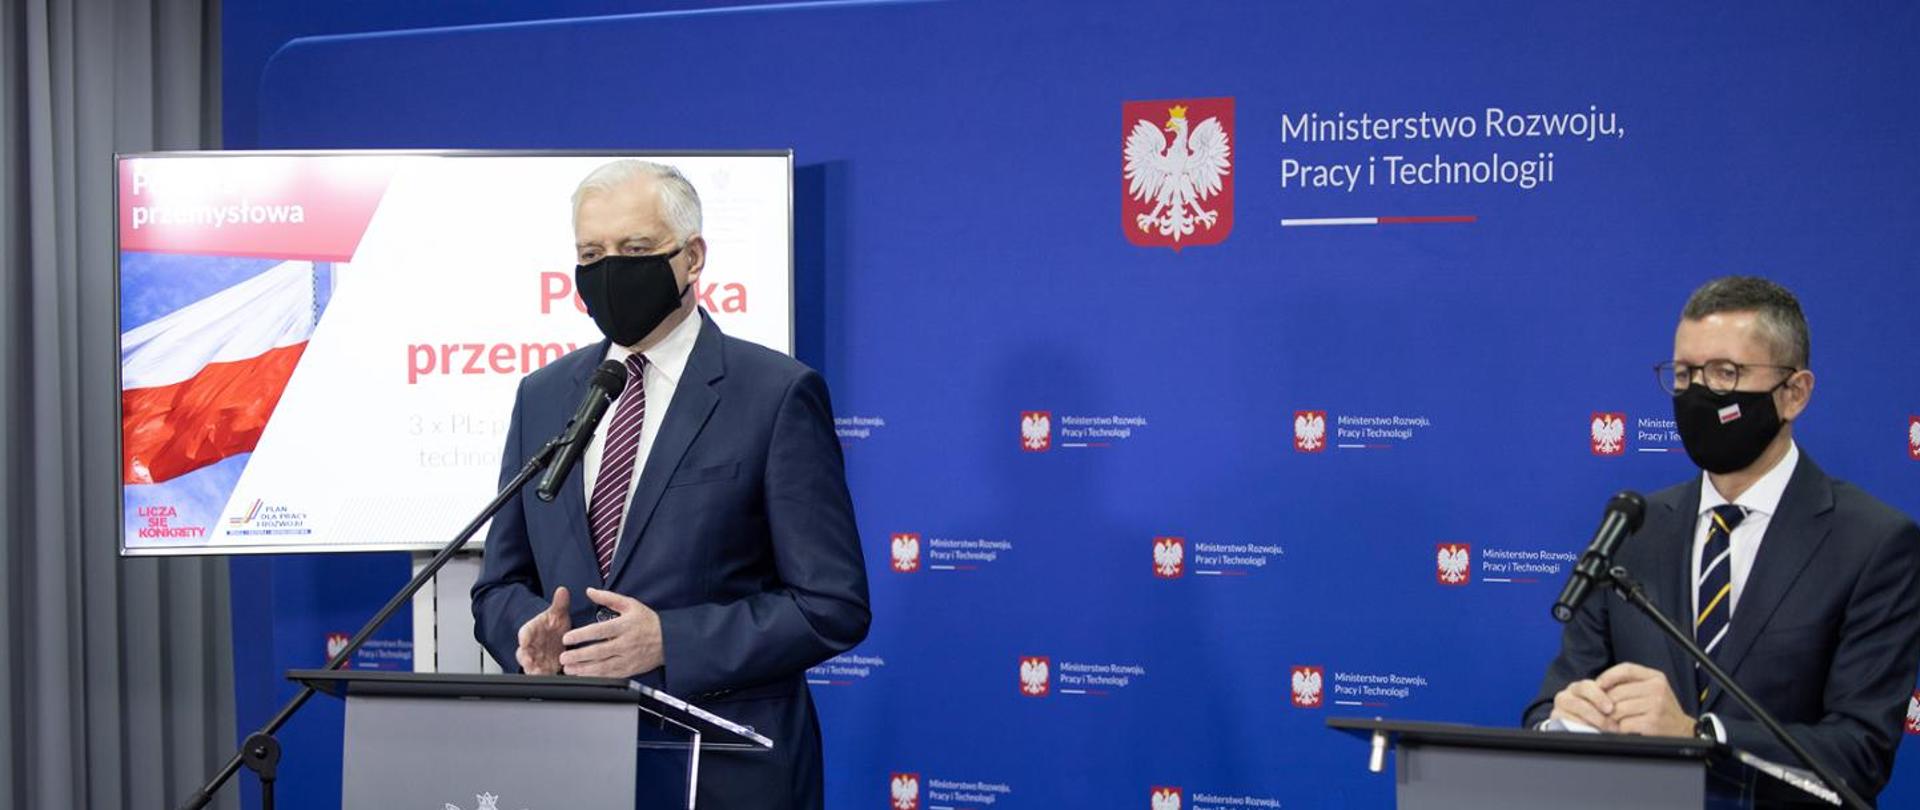 Picture shows Deputy Prime Minister Jarosław Gowin and Deputy Minister Robert Tomanek at the ministry's press conference on the Industrial Policy of Poland